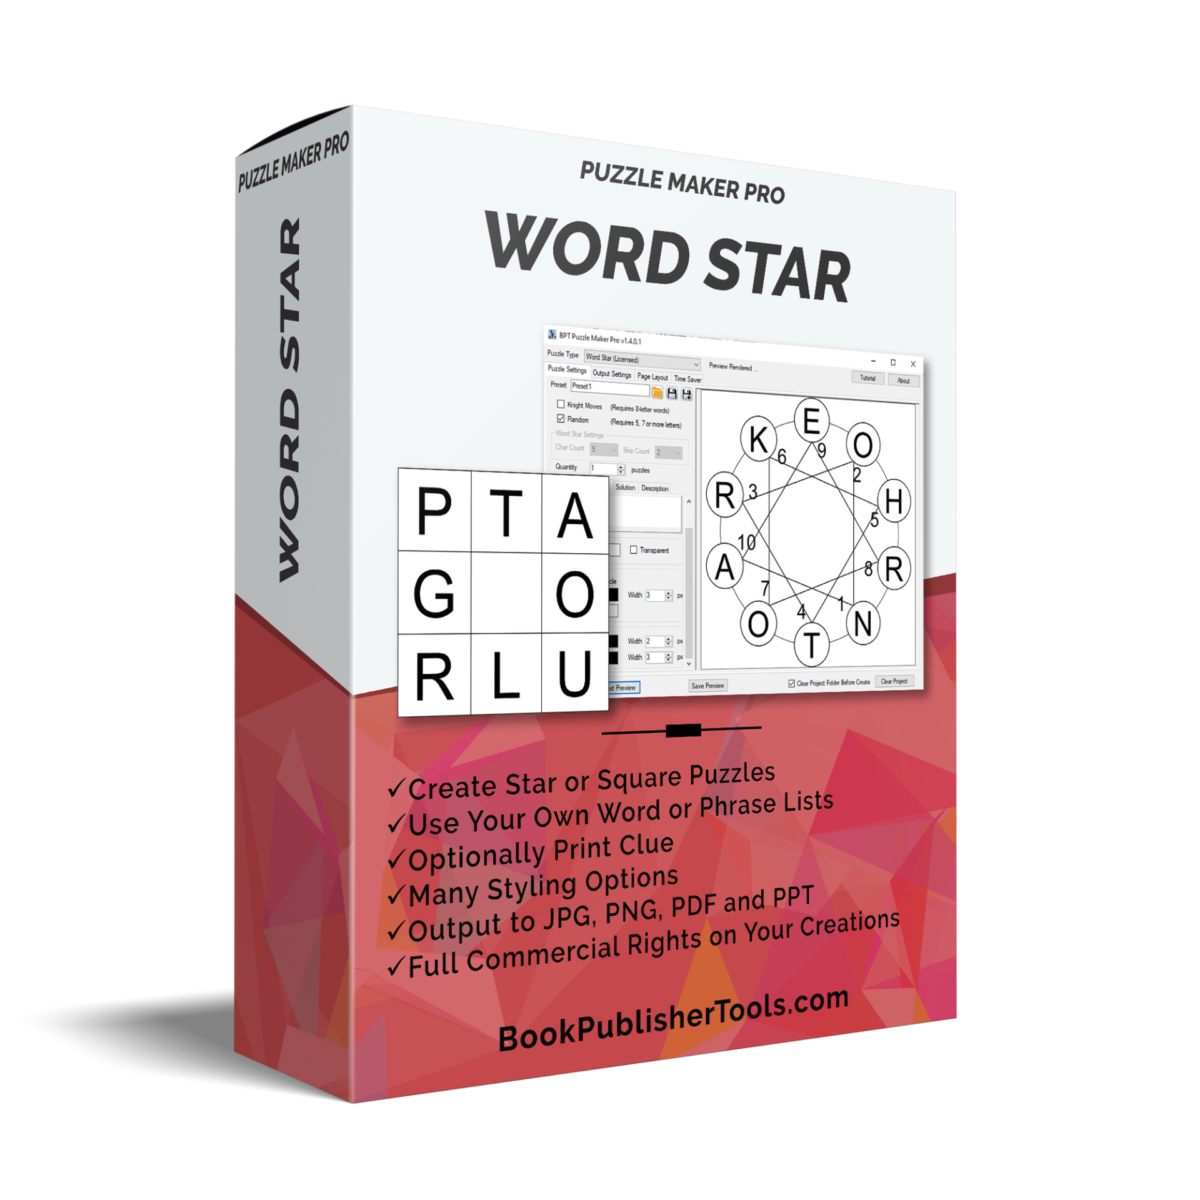 Puzzle Maker Pro - Word Star software box